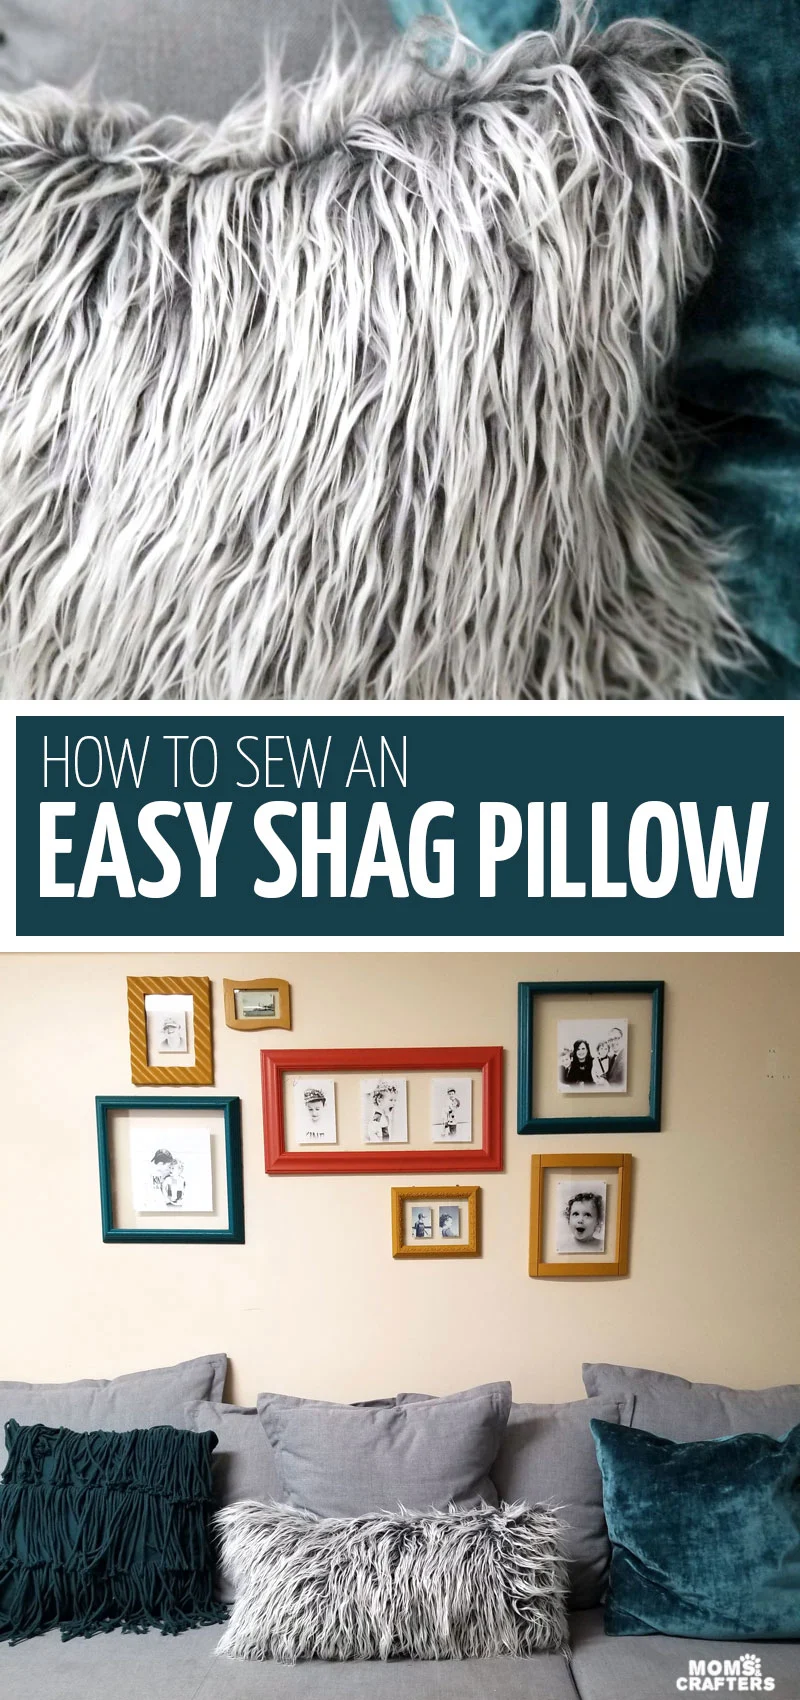 Click to learn how to make a DIY fur pillow - an easy cozy home decor idea for winter! This shag pillow uses faux fur and is a beginner sewing project that also teaches how to sew faux fur. 